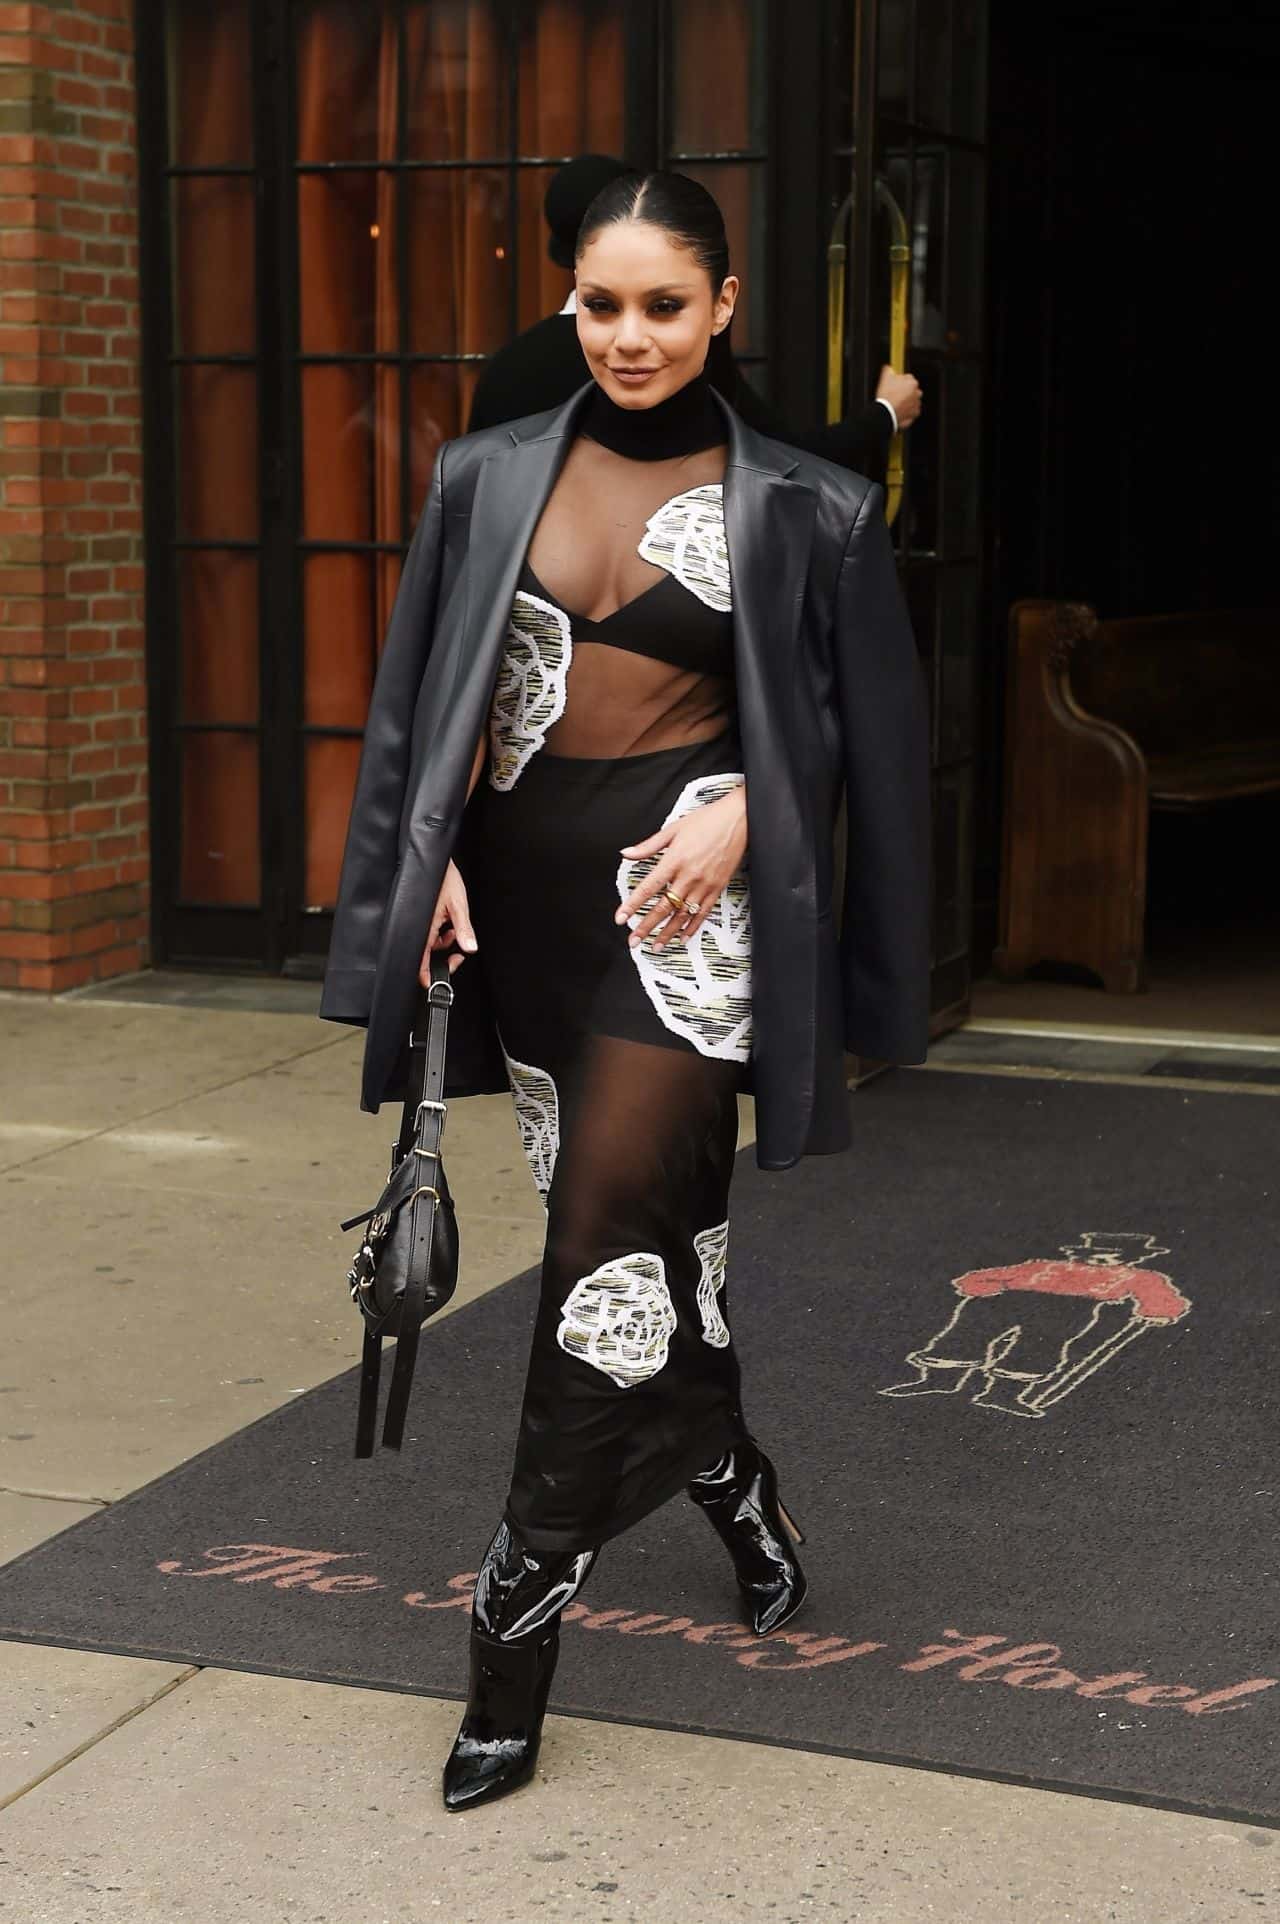 Vanessa Hudgens Steps Out in Style for “Dead Hot” Promotion in NY